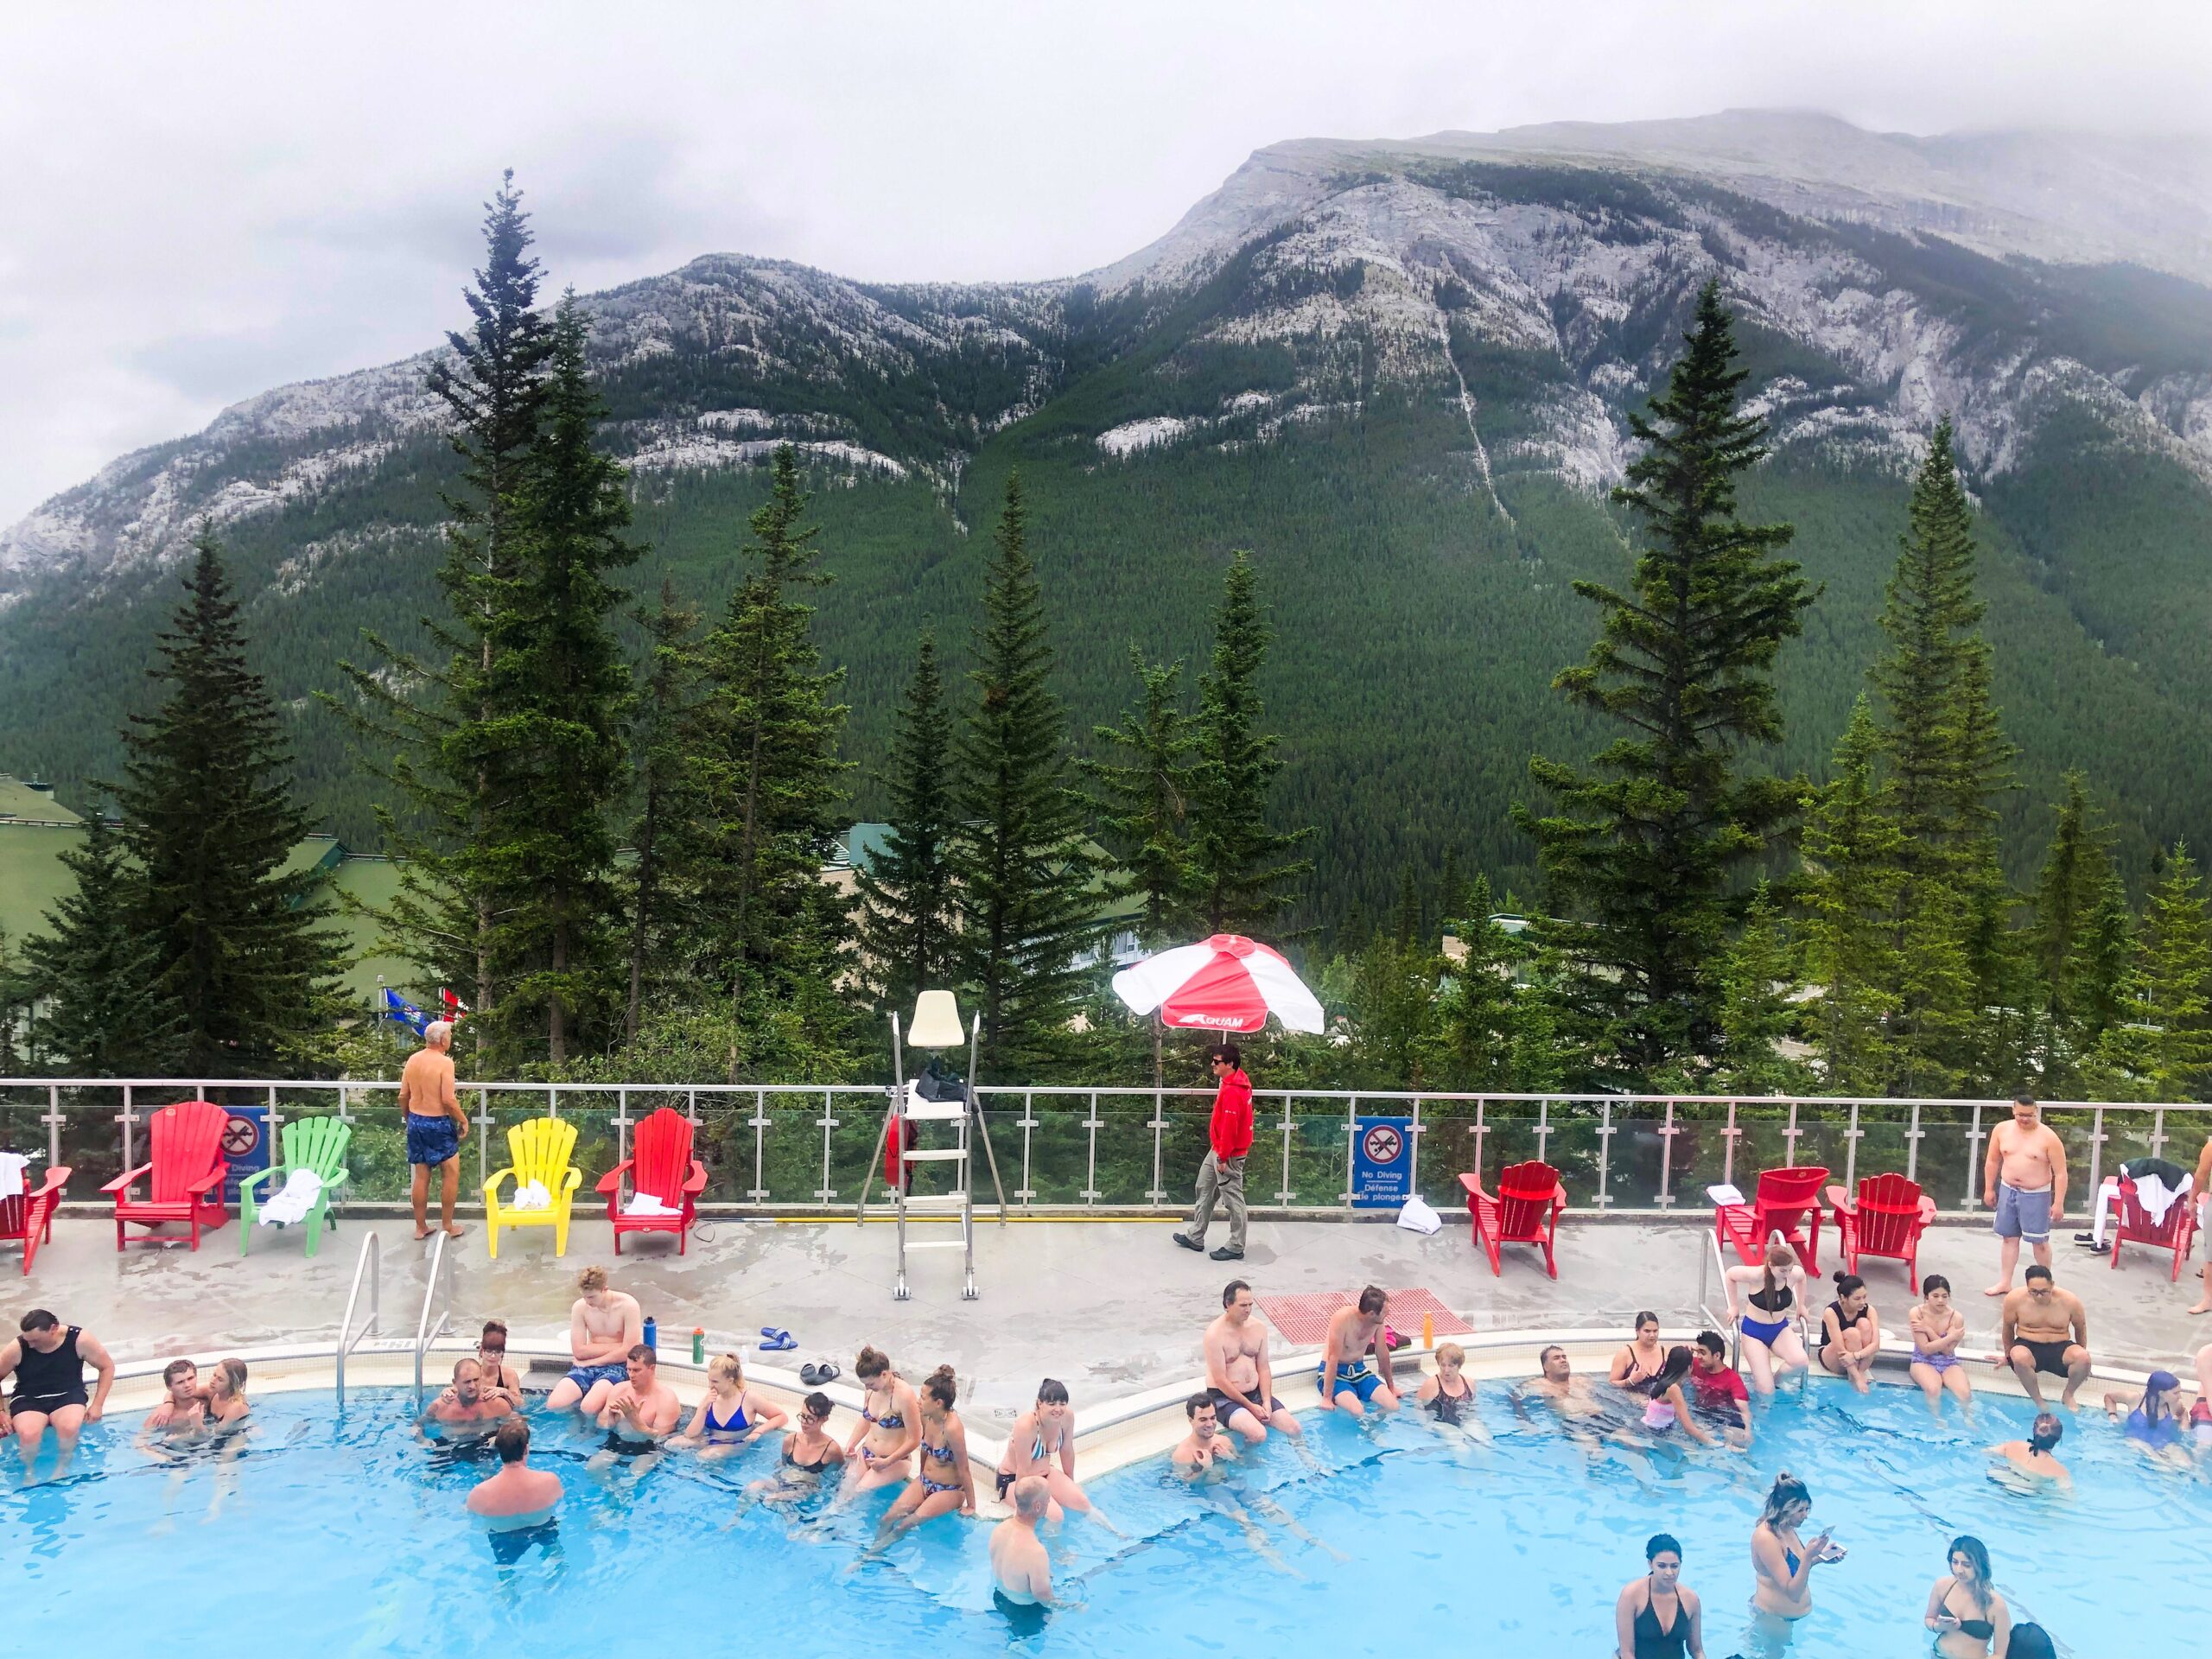 Banff Travel Guide- Banff Upper Hot Springs on Livin' Life with Style